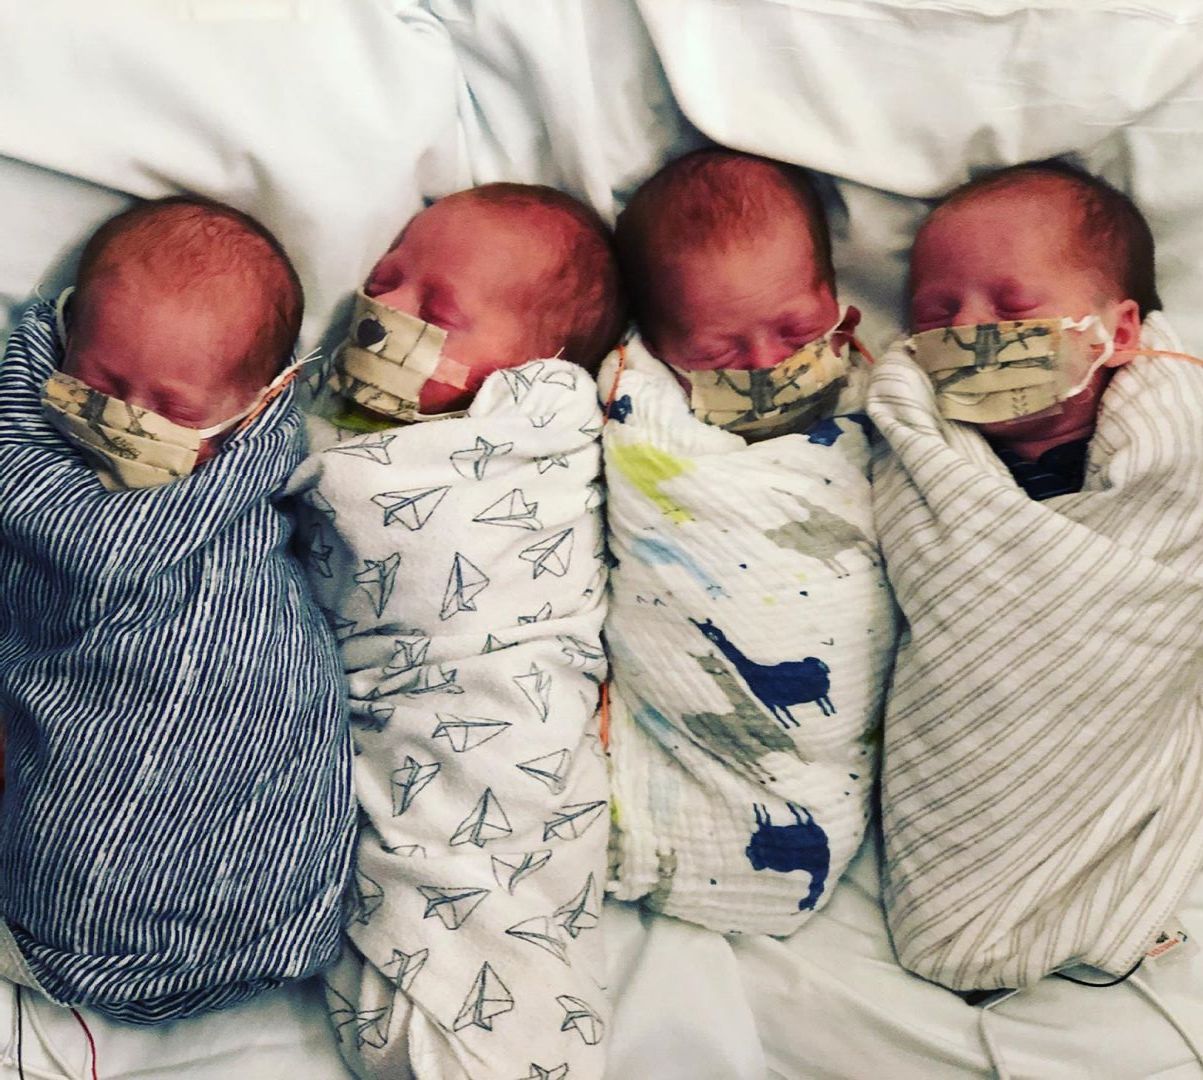 New Mom Gives Birth To Identical Quadruplets During Pandemic